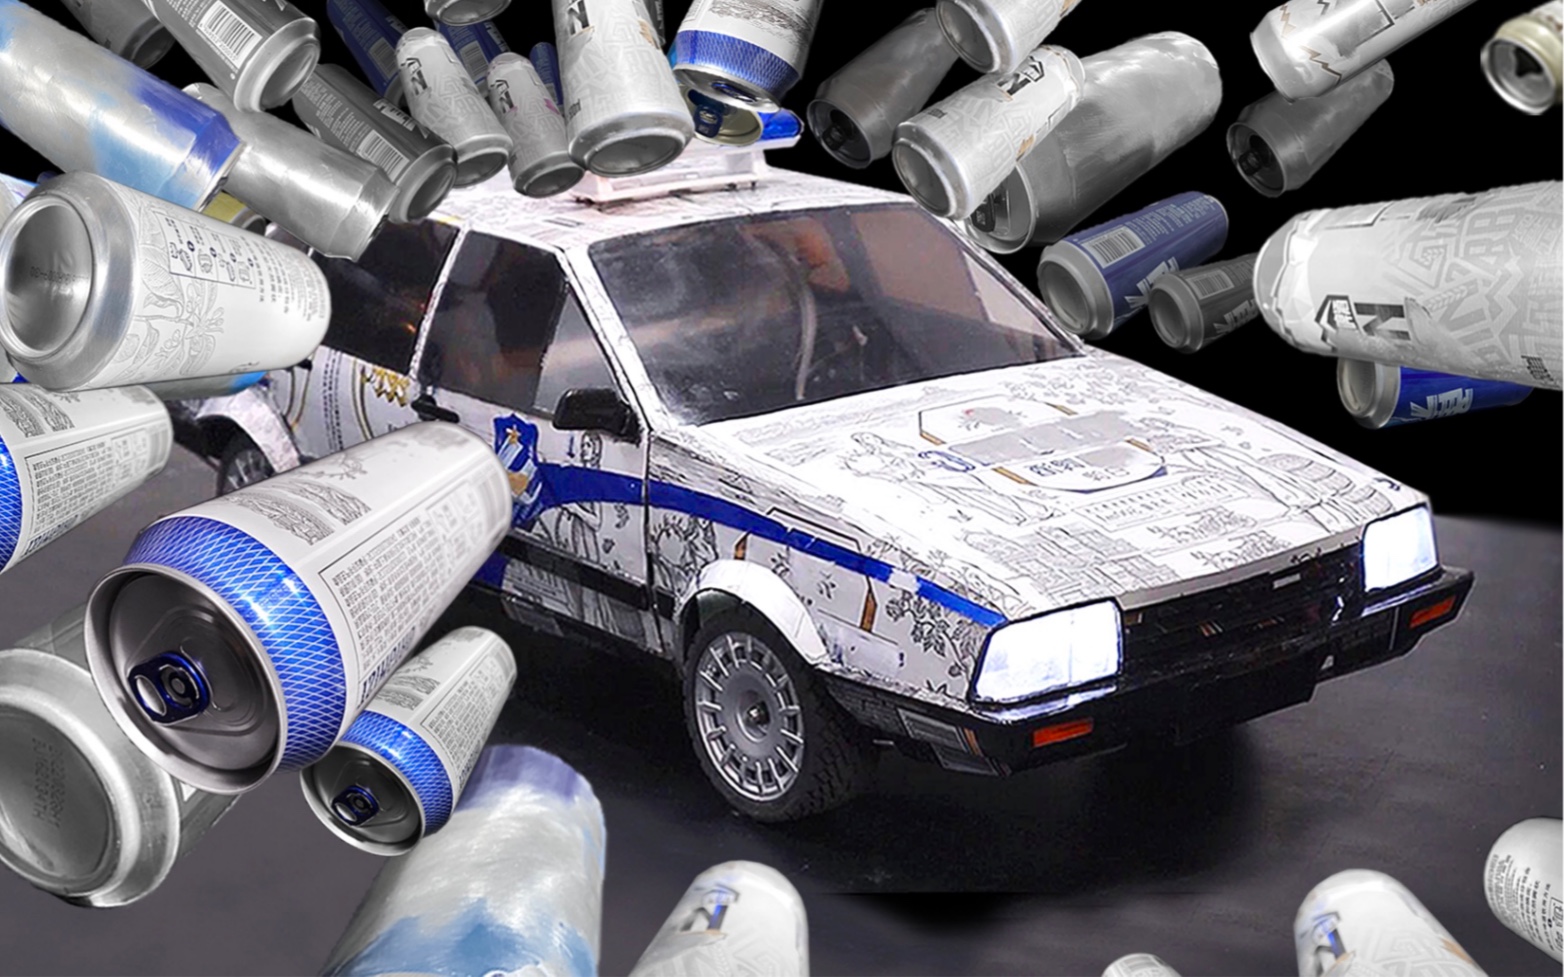 Handmade Model Cars Built with Recycled Cans | Gadgetsin